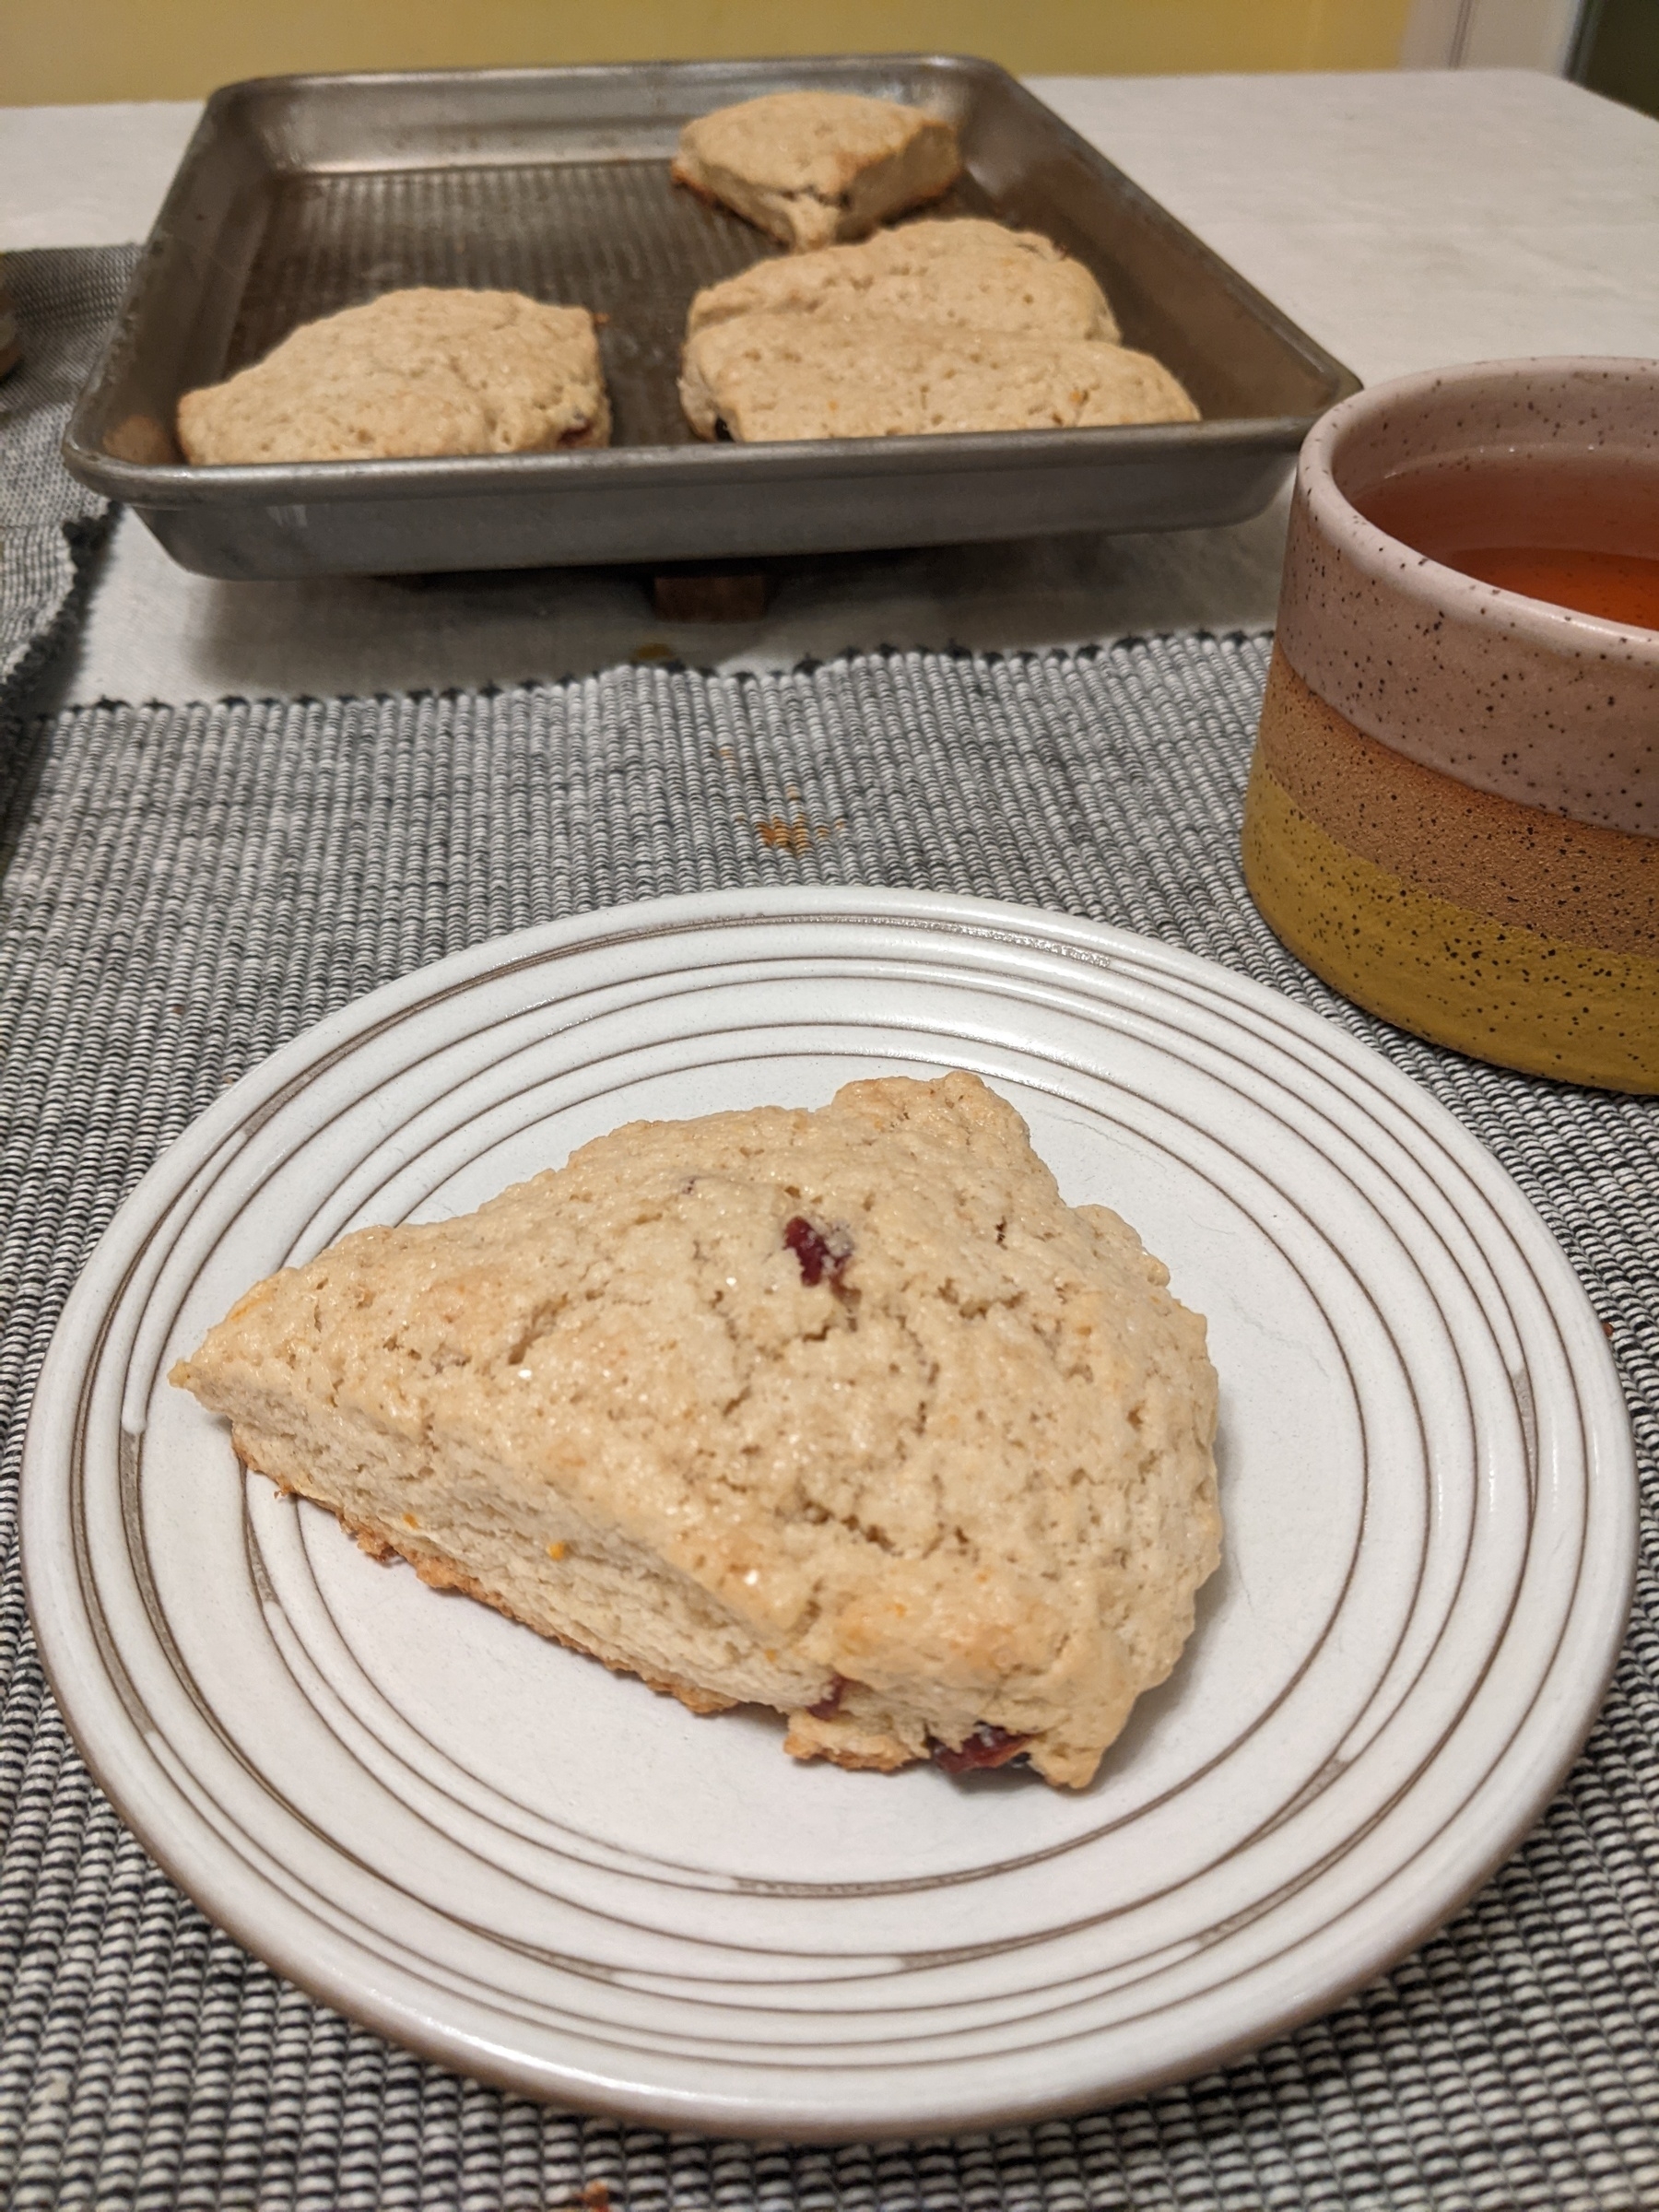 scone on small plate next to mug of tea and baking sheet with more scones 